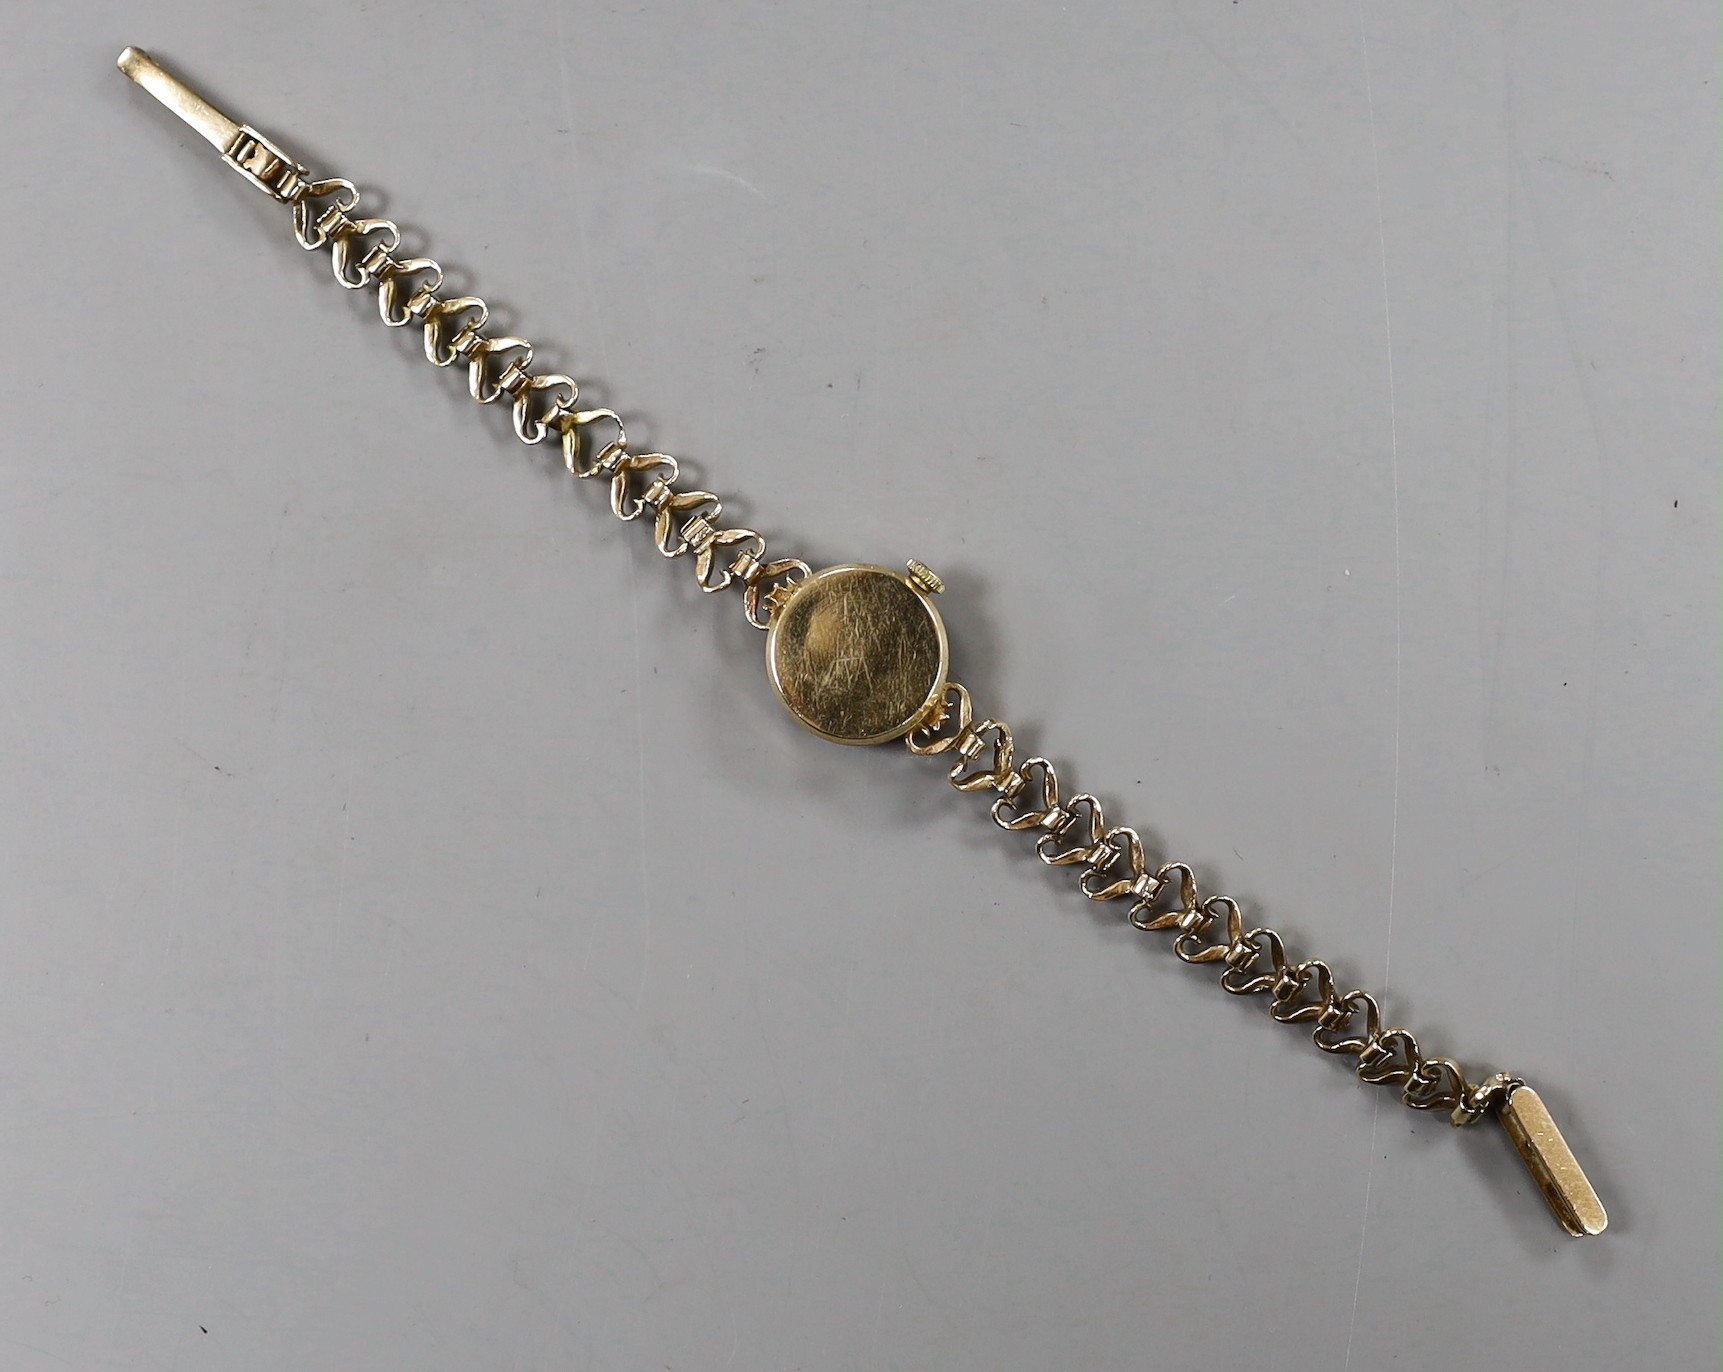 A lady's 9ct gold Accurist manual wind wrist watch, on a 9ct gold bracelet, overall 17.8cm, gross weight 14.1 grams.